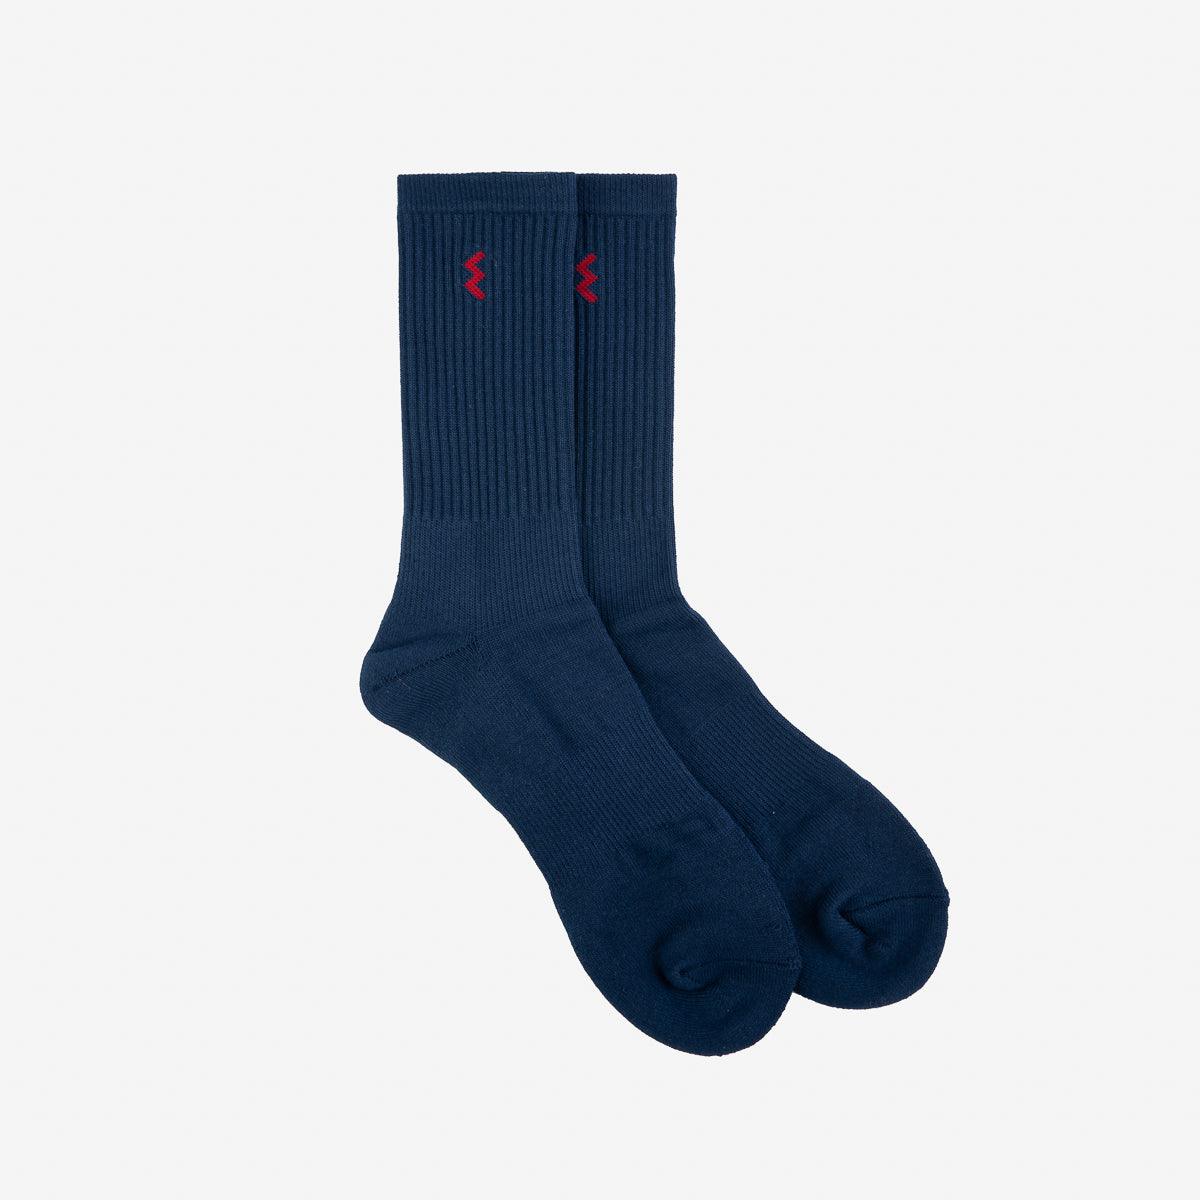 Image showing the IHG-030/3-NAV - 3-Pack Iron Heart Boot Socks - Navy which is a Socks described by the following info Footwear, Iron Heart, New, Released, Socks and sold on the IRON HEART GERMANY online store